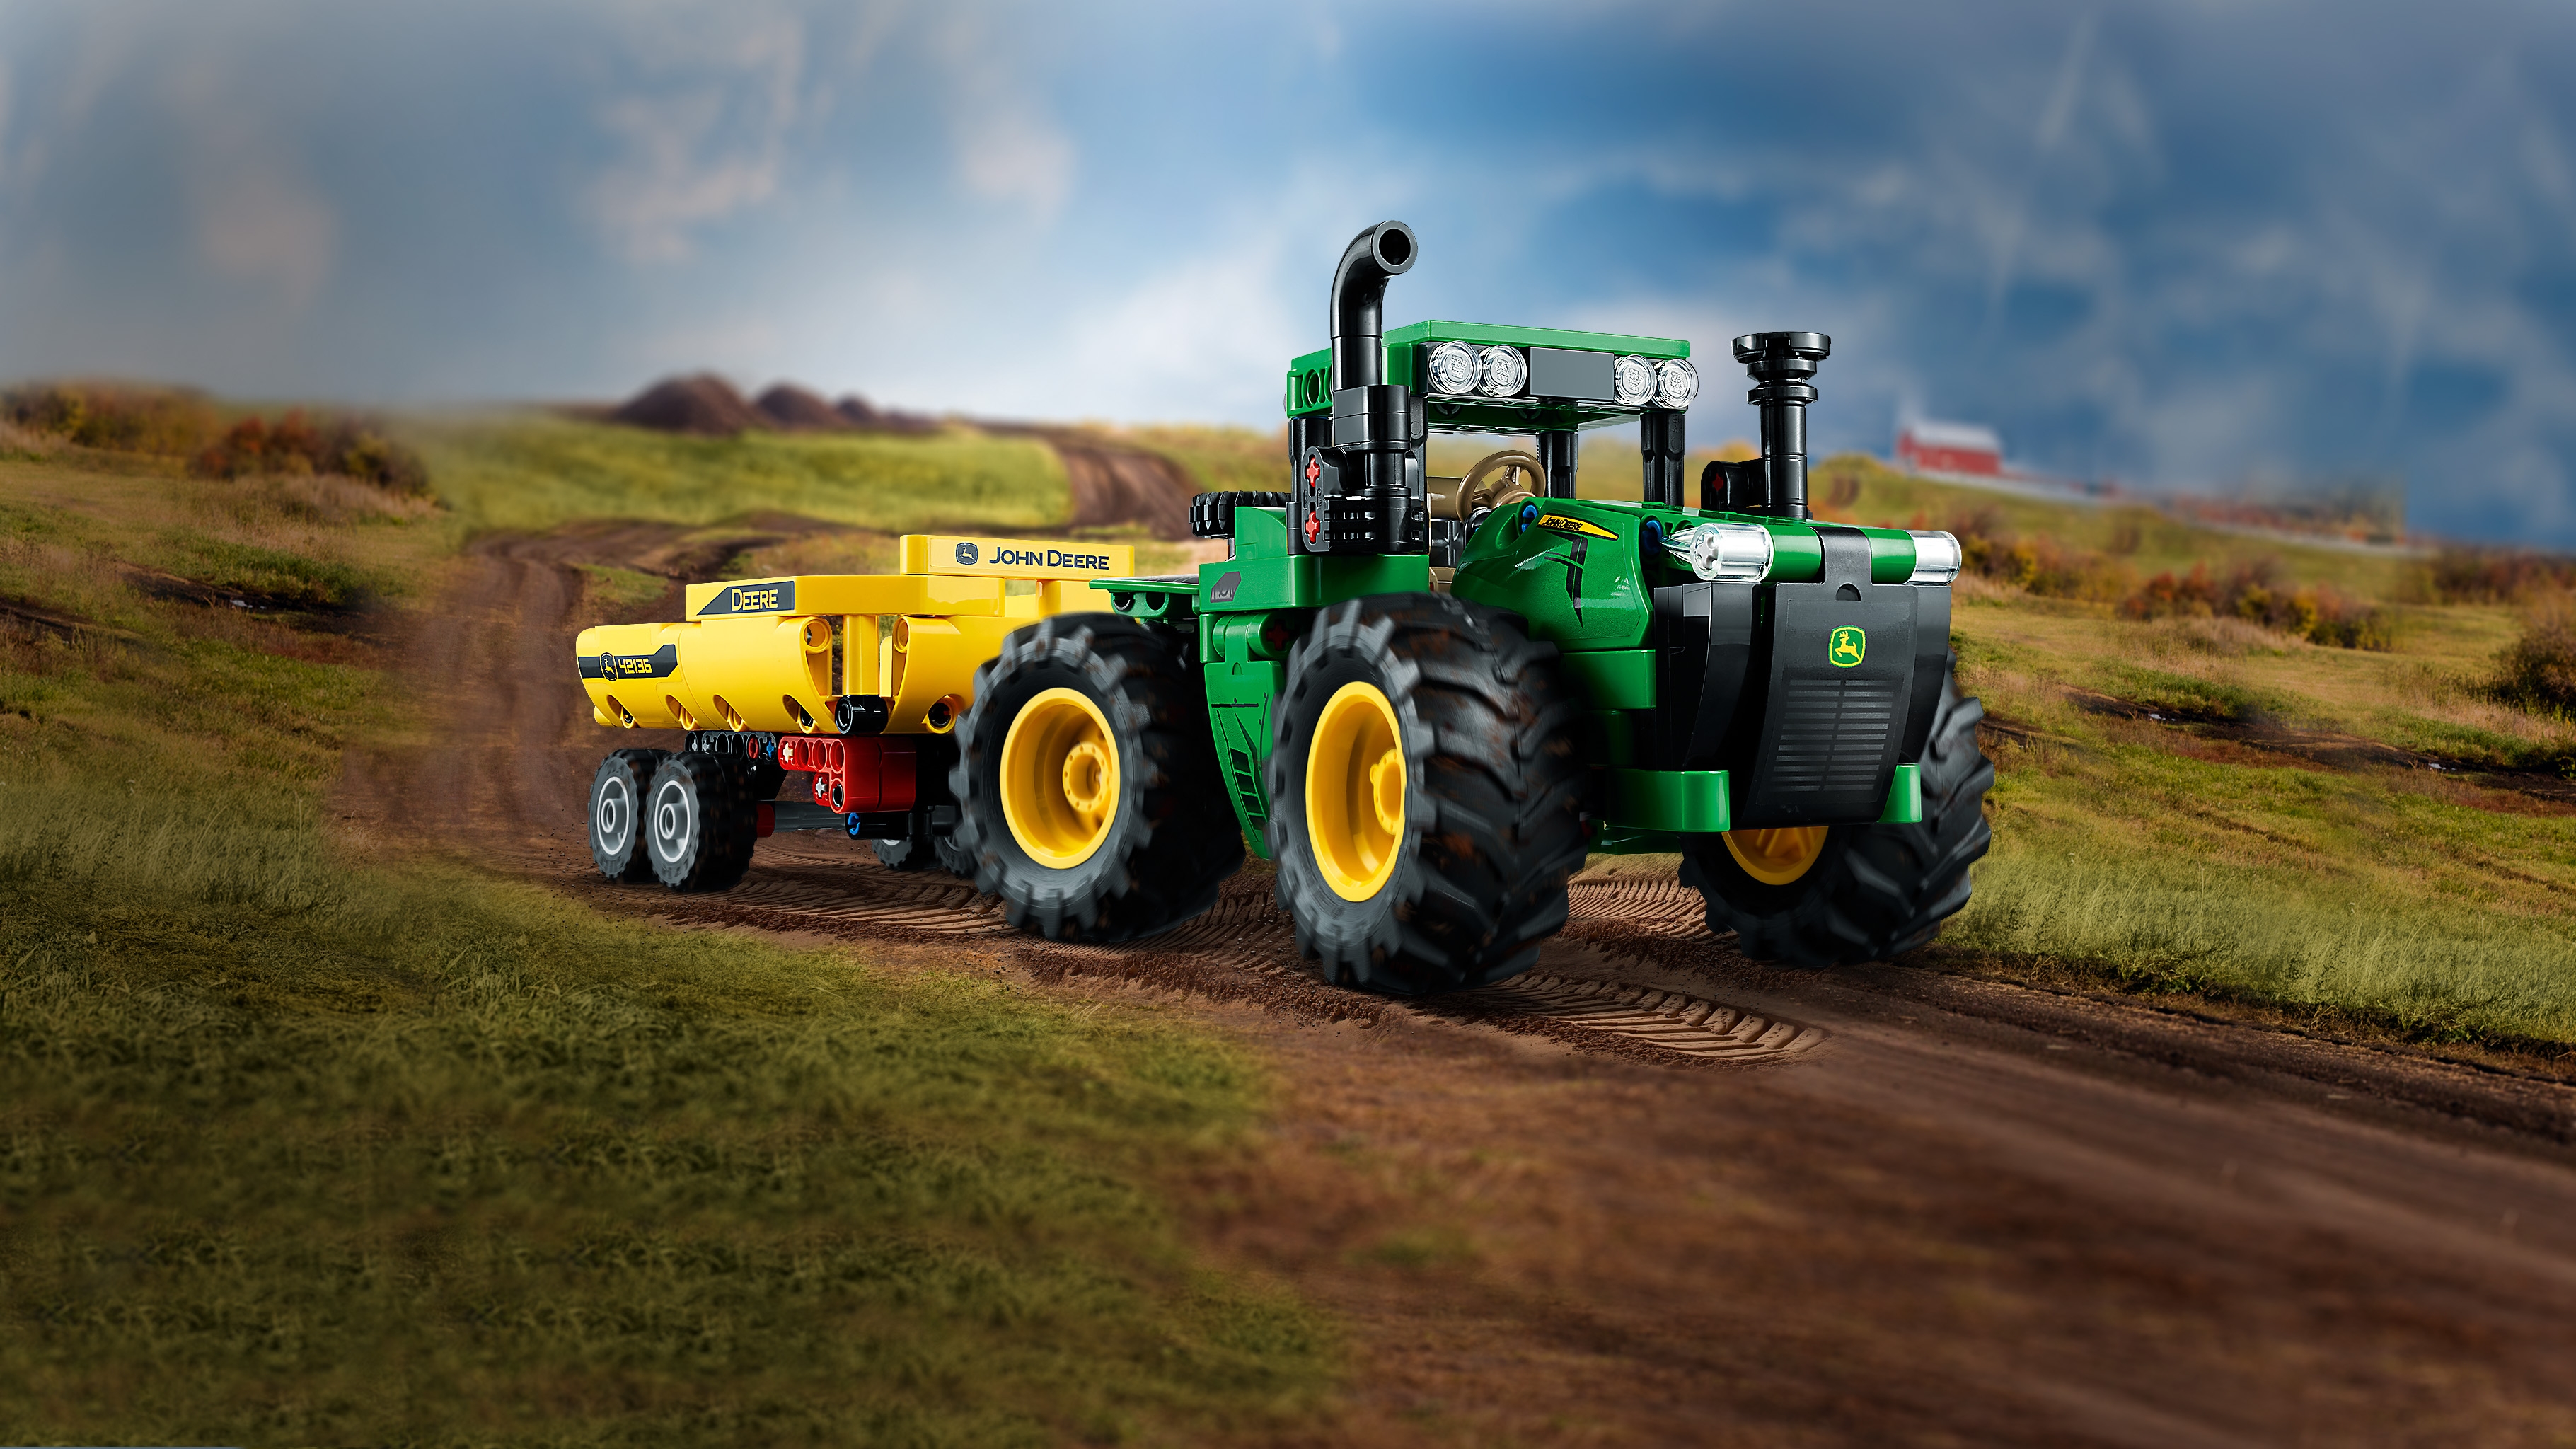 MOC] John Deere 6130R with implements - LEGO Technic, Mindstorms